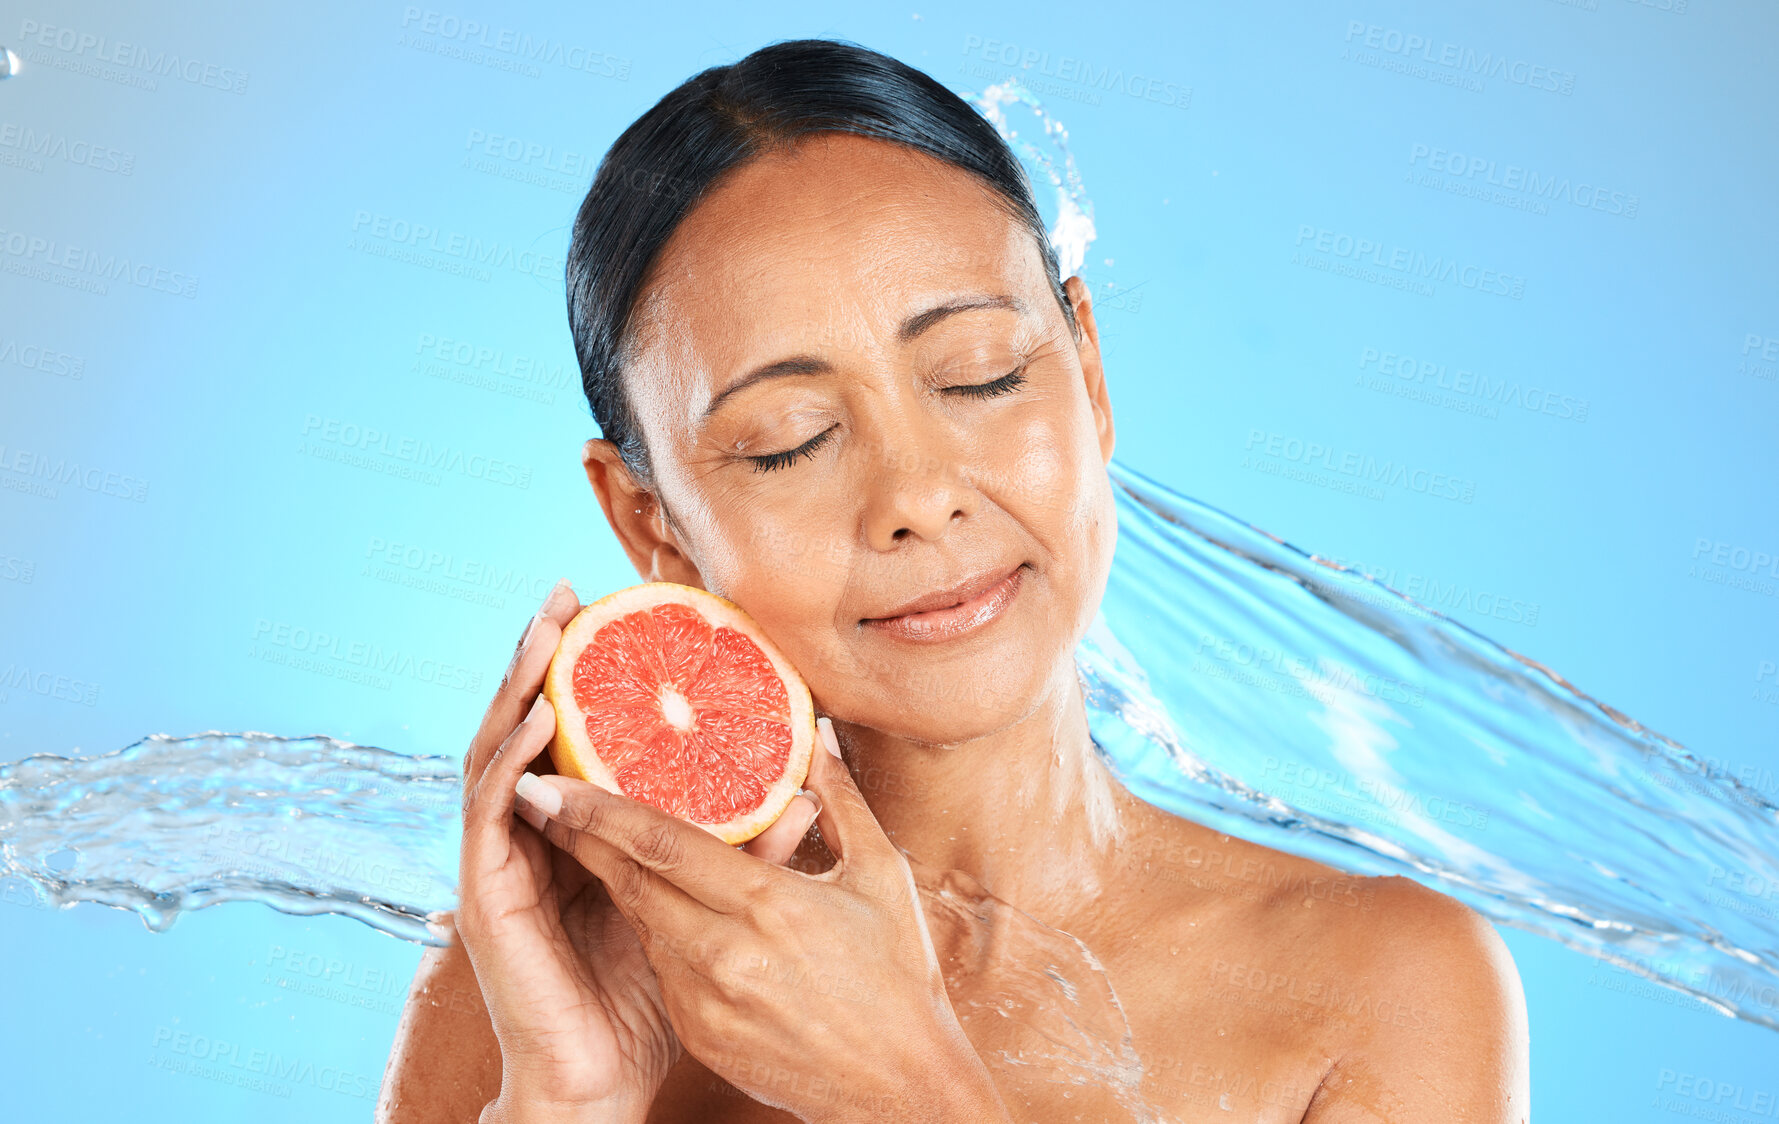 Buy stock photo Water splash, fruit and skincare wellness of a woman with a grapefruit feeling health and beauty. Diet, nutrition and healthy skin of a model with natural organic produce feeling calm and peace